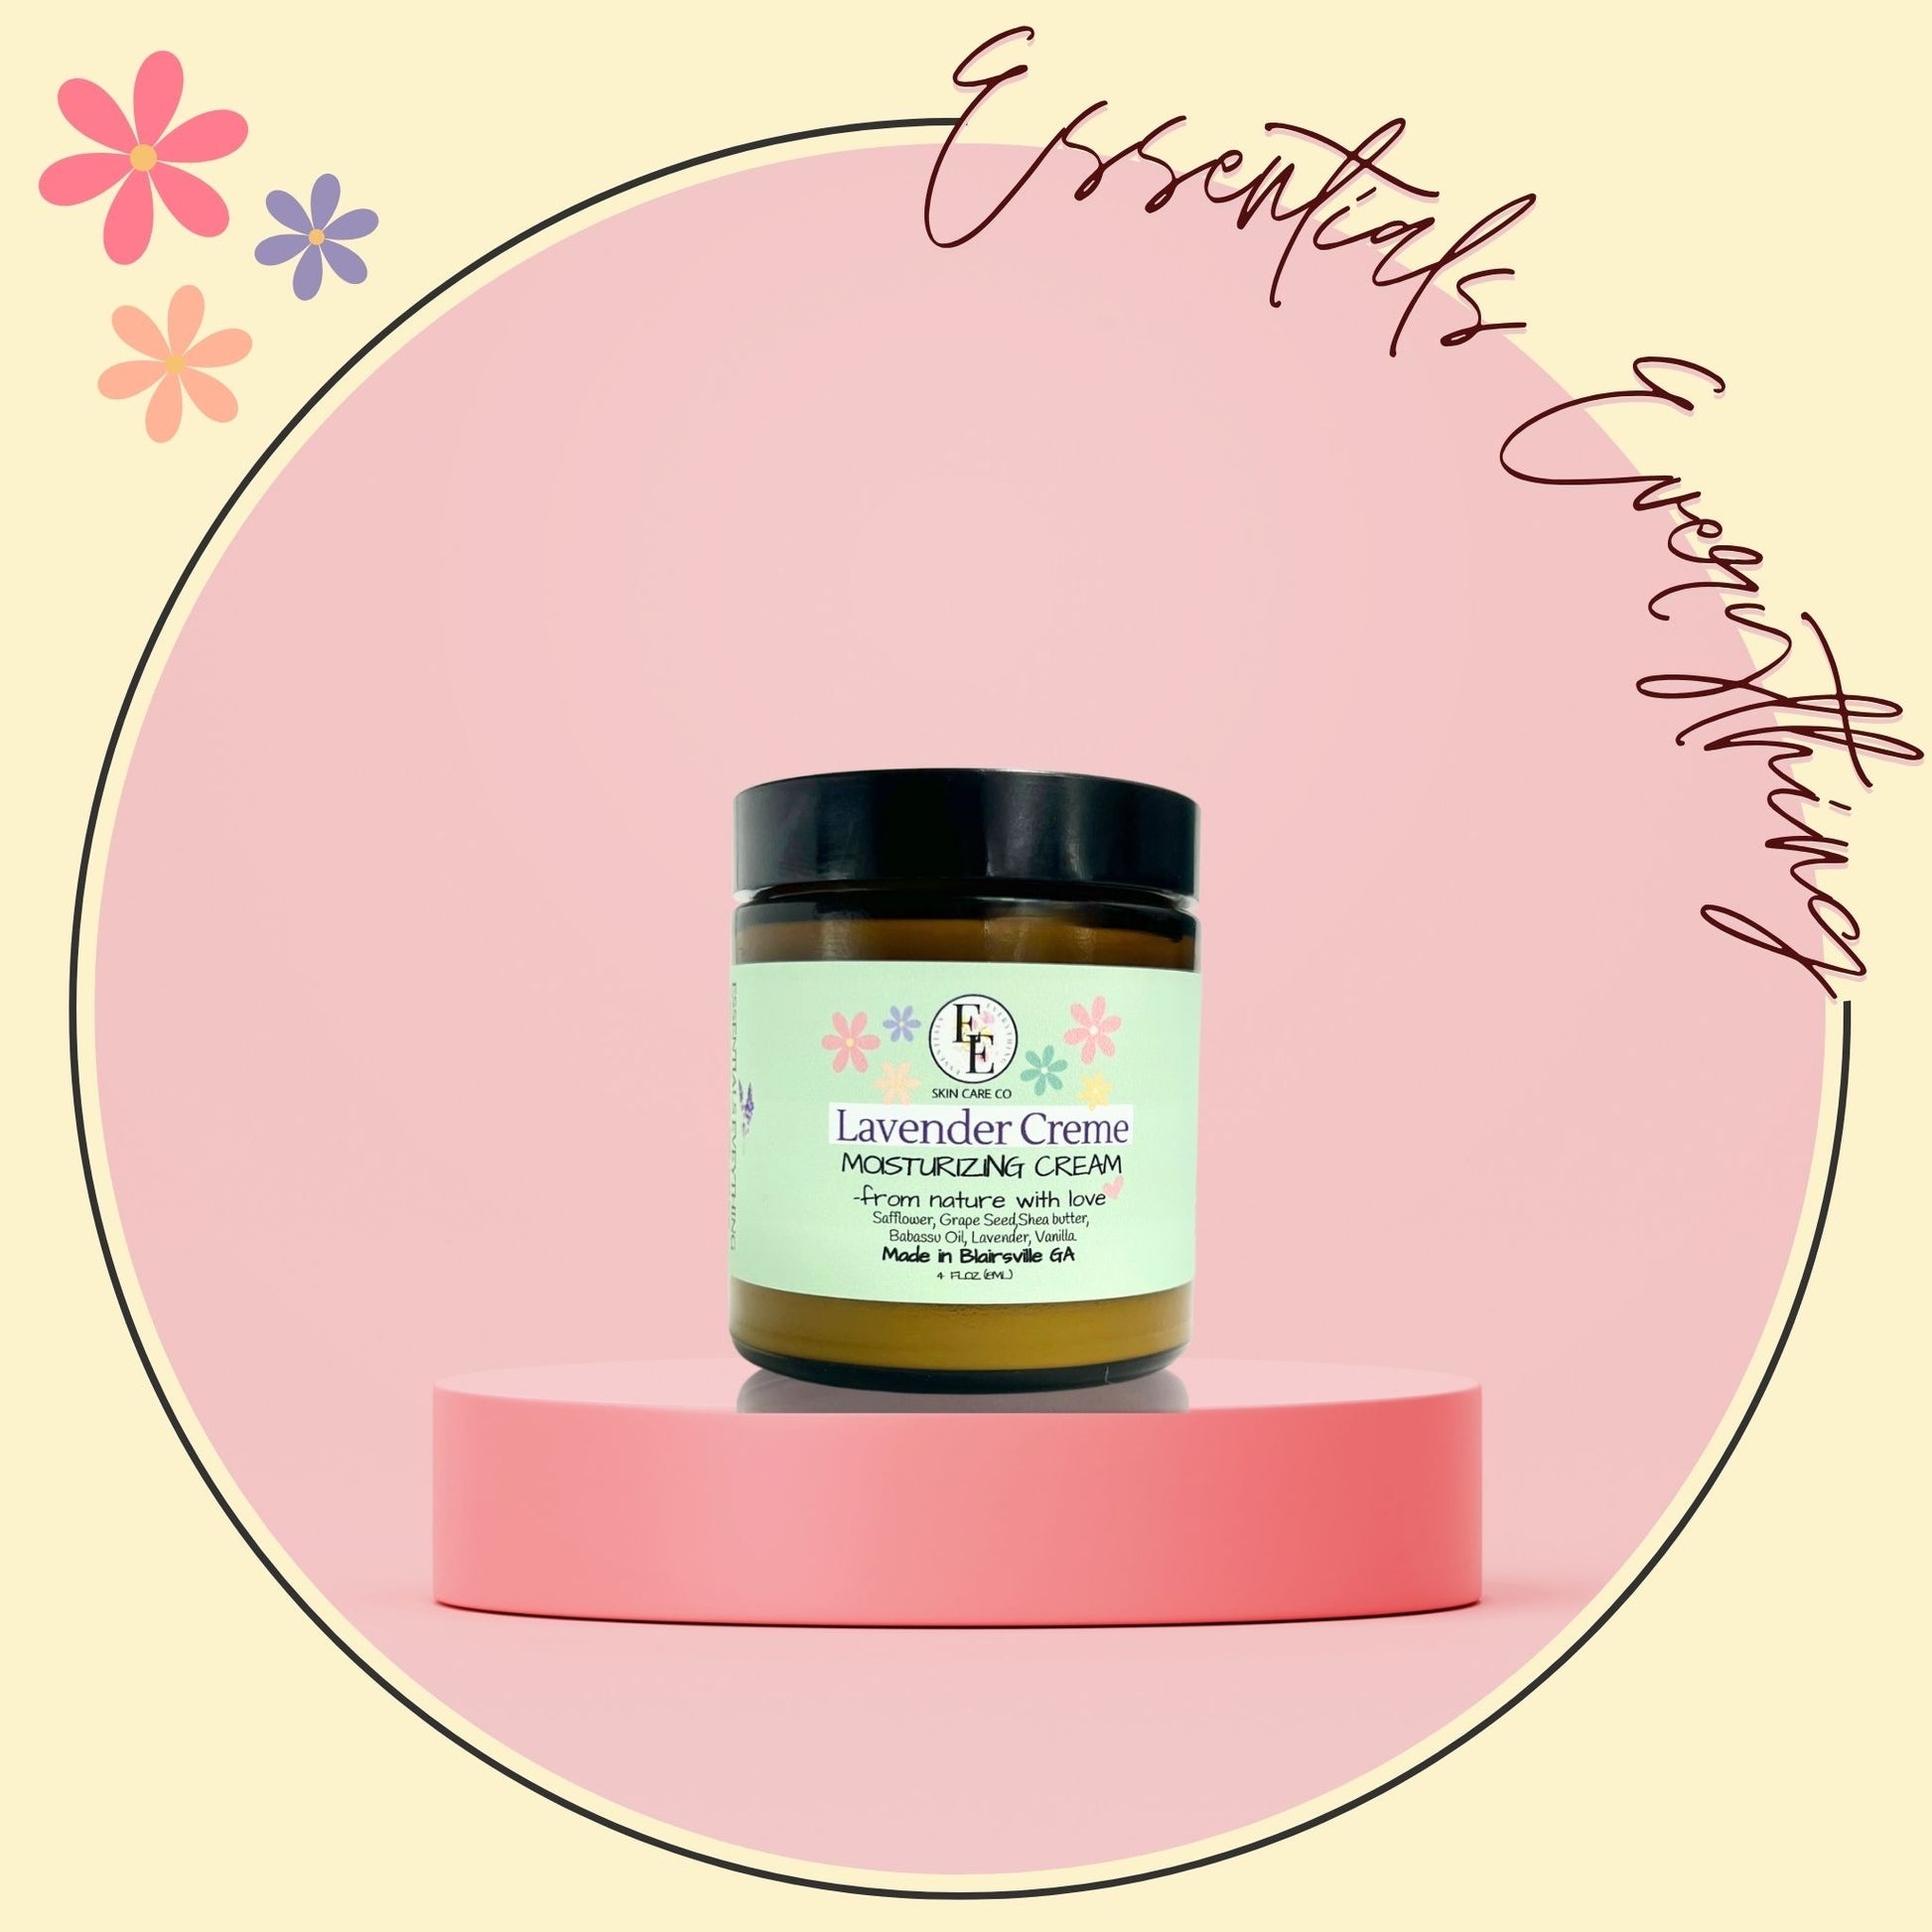 Lavender Creme - Relaxing, All-Natural Body Cream for All Skin Types by Essentials Everything Skin Care Co. Organic, Vegan & Cruelty-Free. Handcrafted in the USA 4oz.